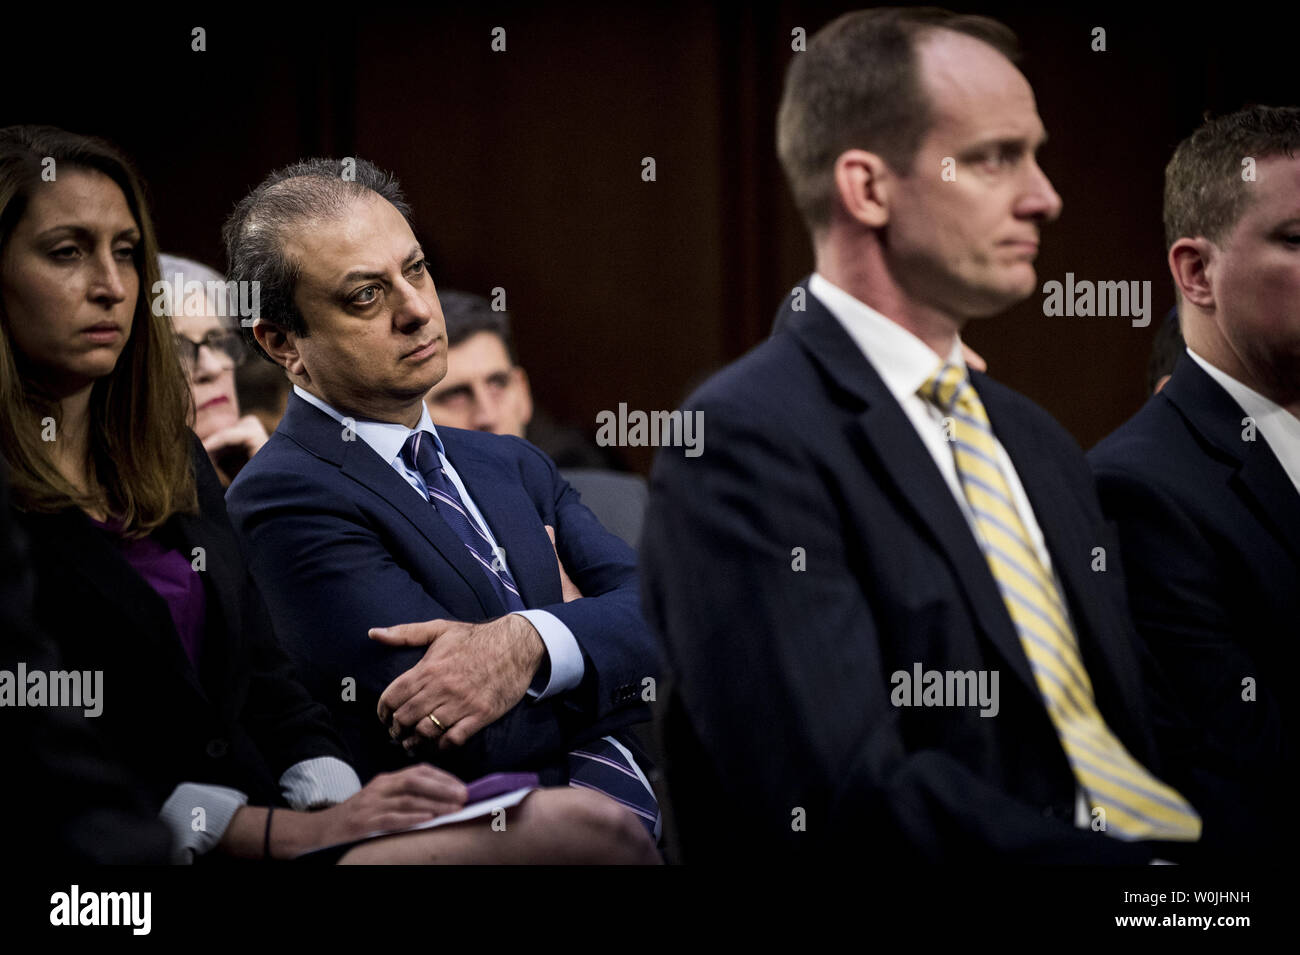 Preet Bharara , former U.S. Attorney for the Southern District of New York looks on as former FBI Director James Comey testifies at a hearing of the Senate Select Intelligence Committee on Capitol Hill in Washington, D.C. on June 8, 2017. Comey testified about his interactions with President Donald Trump that included the alleged pressure Comey felt to stop certain investigations regarding Russia and its interference in the presidential election.  Comey was abruptly fired by the president last month.  Photo by Pete Marovich/UPI Stock Photo